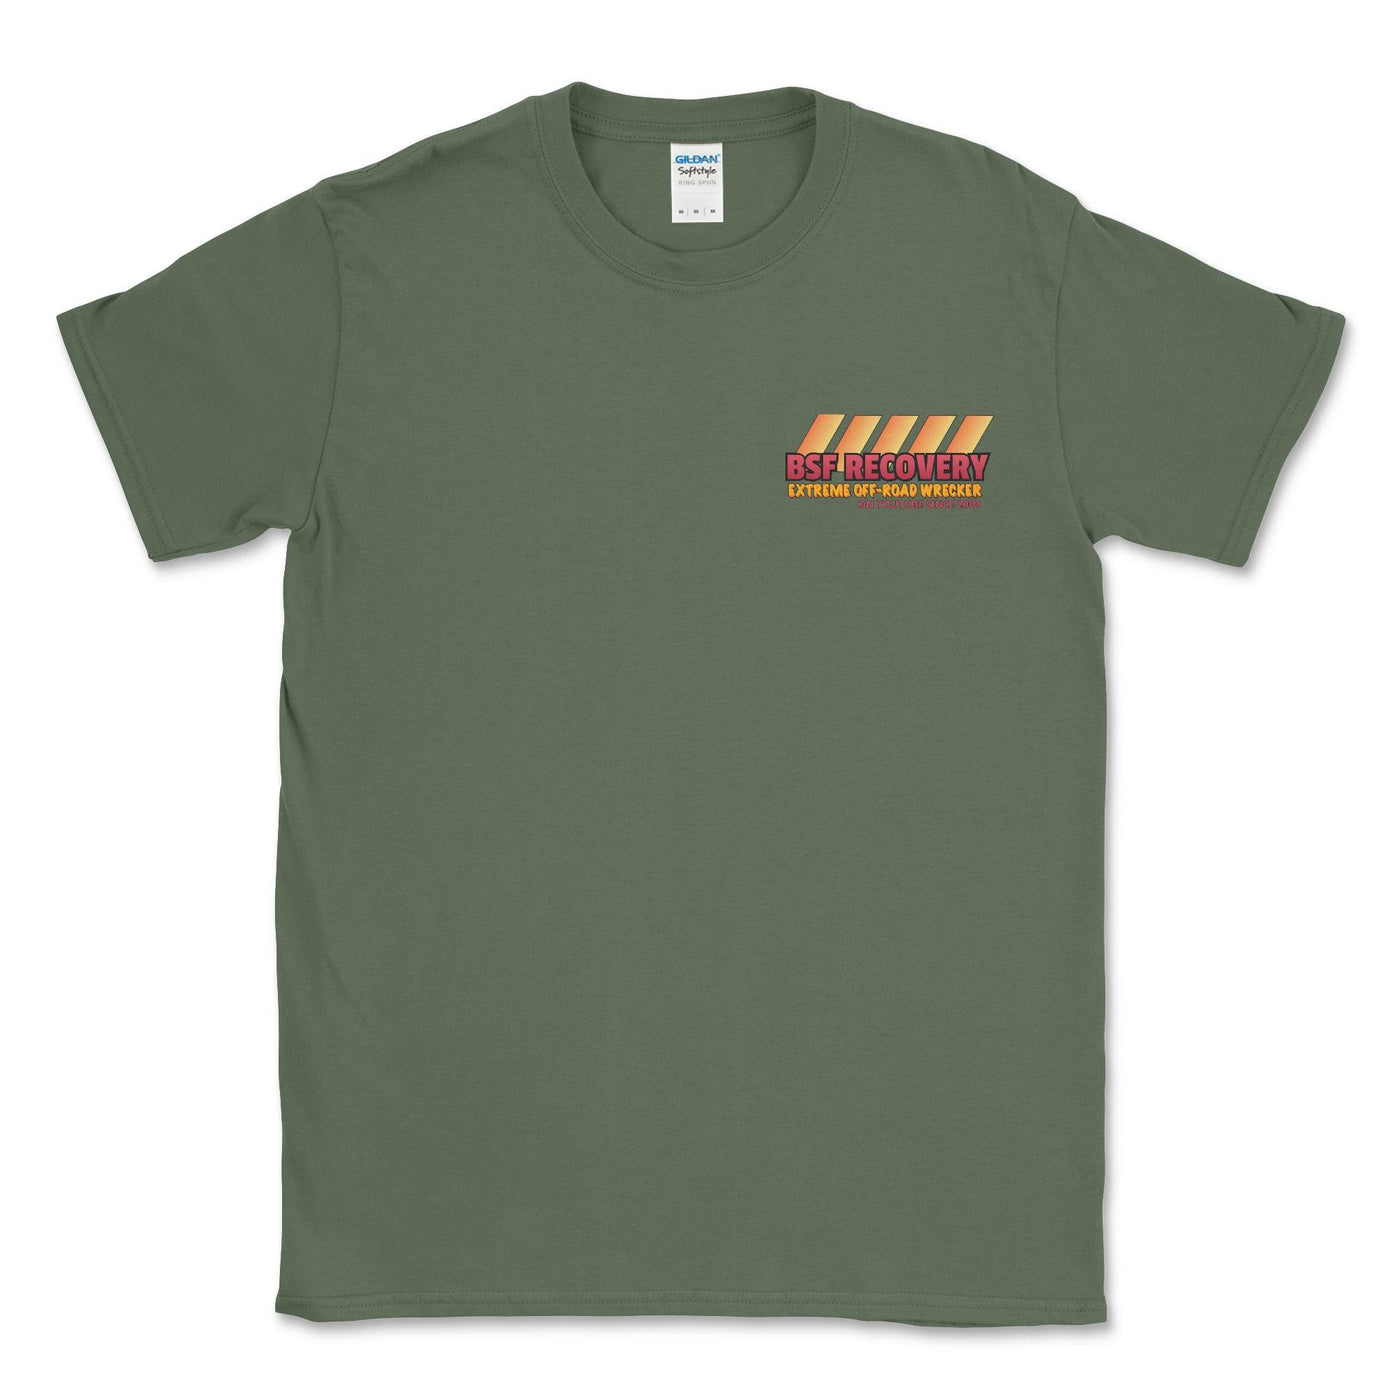 BSF Recovery Logo Tee - Goats Trail